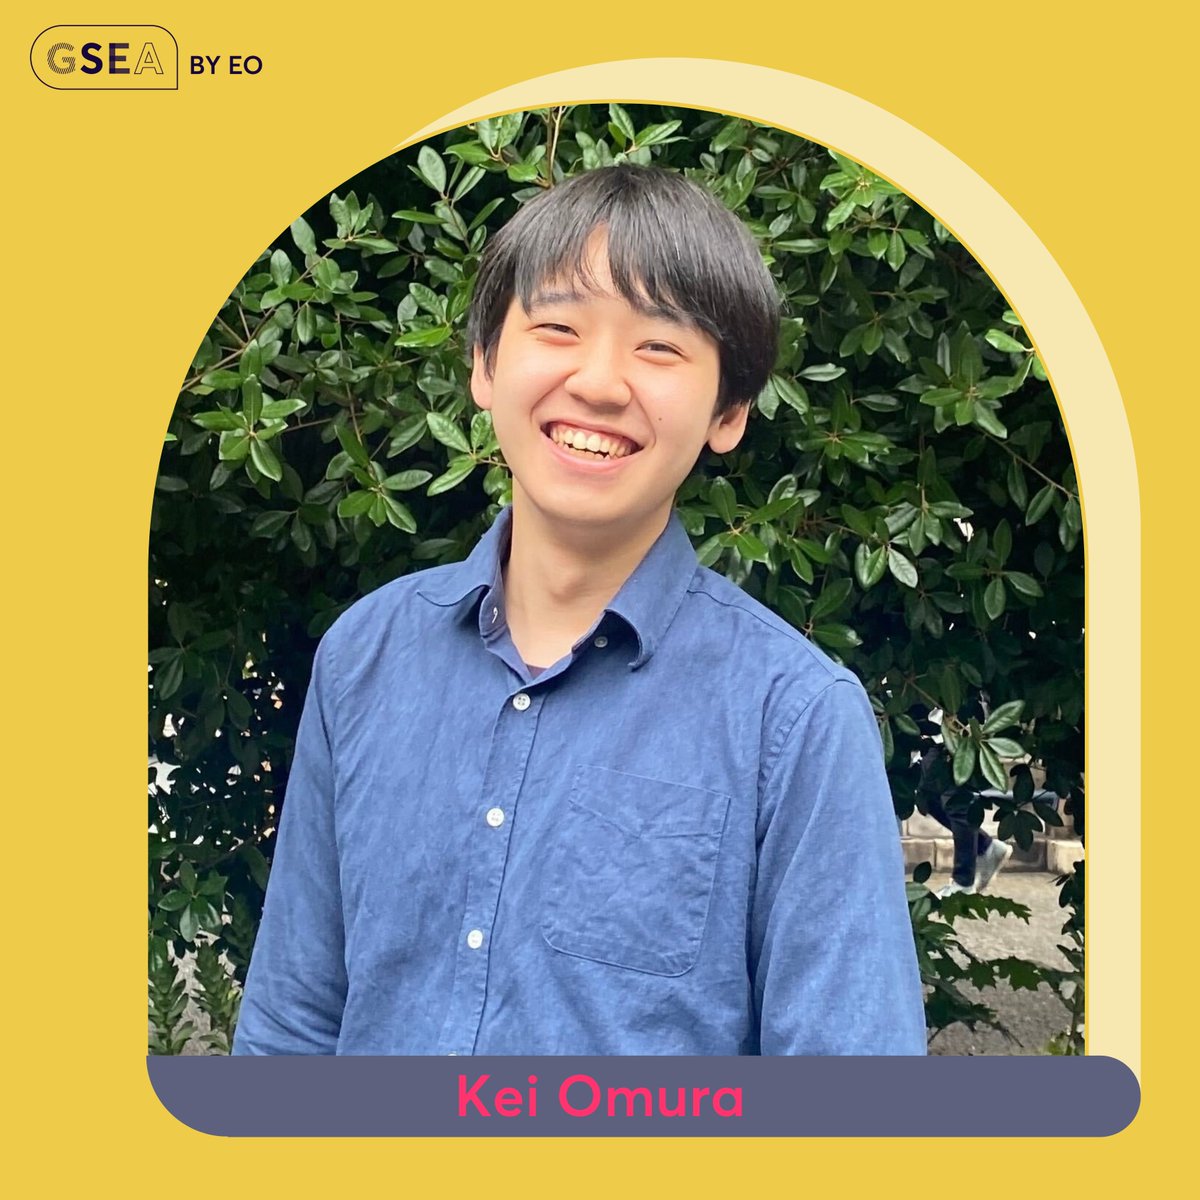 🌟 Meet Kei Omura, winner of EO Tokyo Central GSEA! 🏆 Kei's mairu tech. Inc. revolutionizes medical transport with standardized services and qualified crews. 🚑 Join us in cheering for Kei at the North Asia & APAC Global Quarter Finals! 🌍🚀 #EO #GSEA #HealthcareInnovation